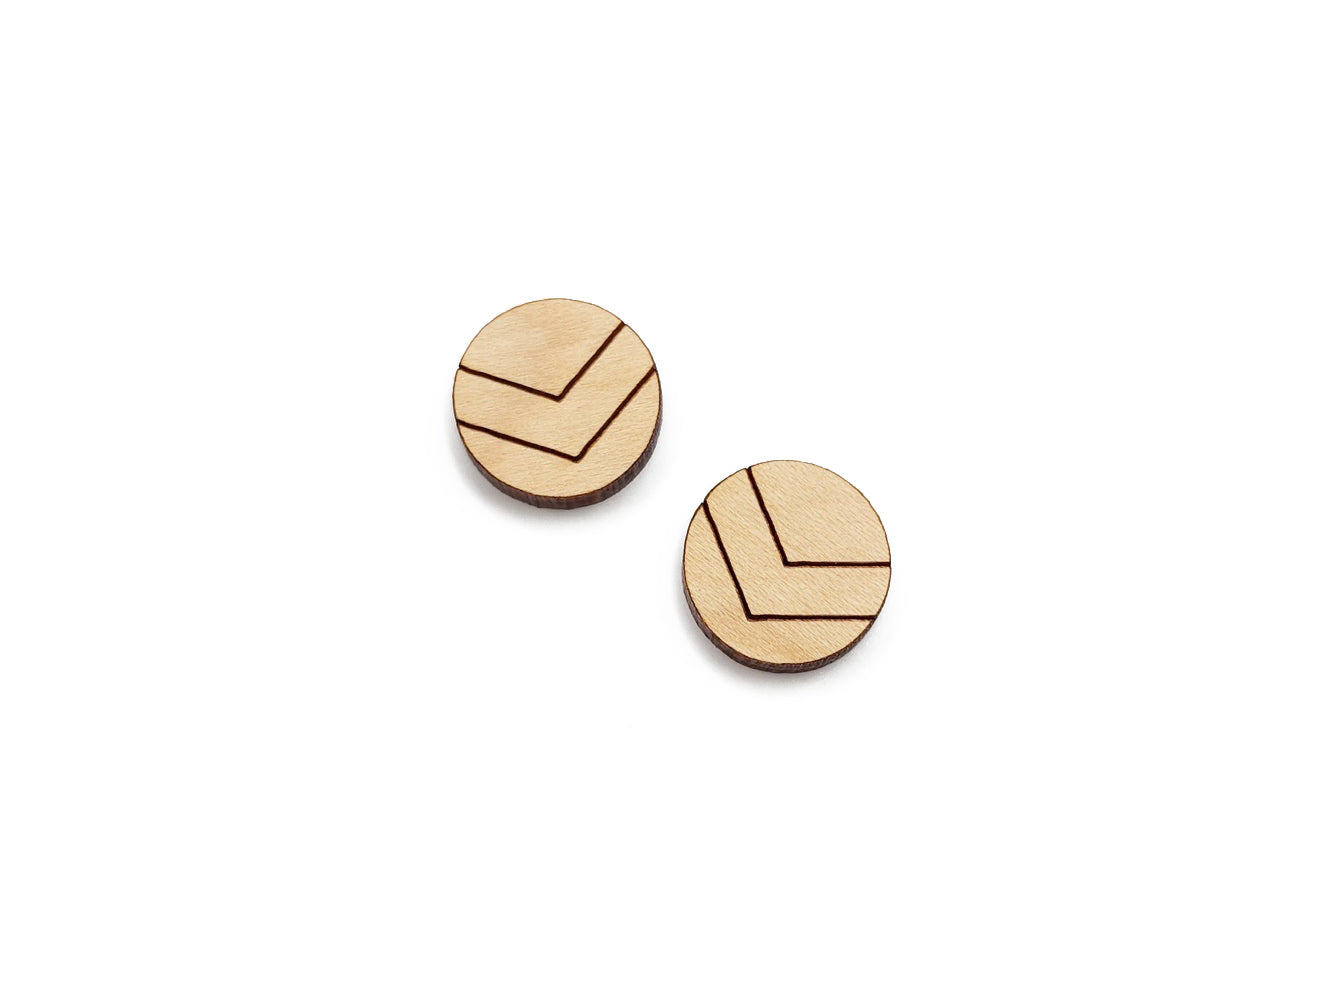 a pair of round wooden cabochon earring blanks engraved with chevron lines